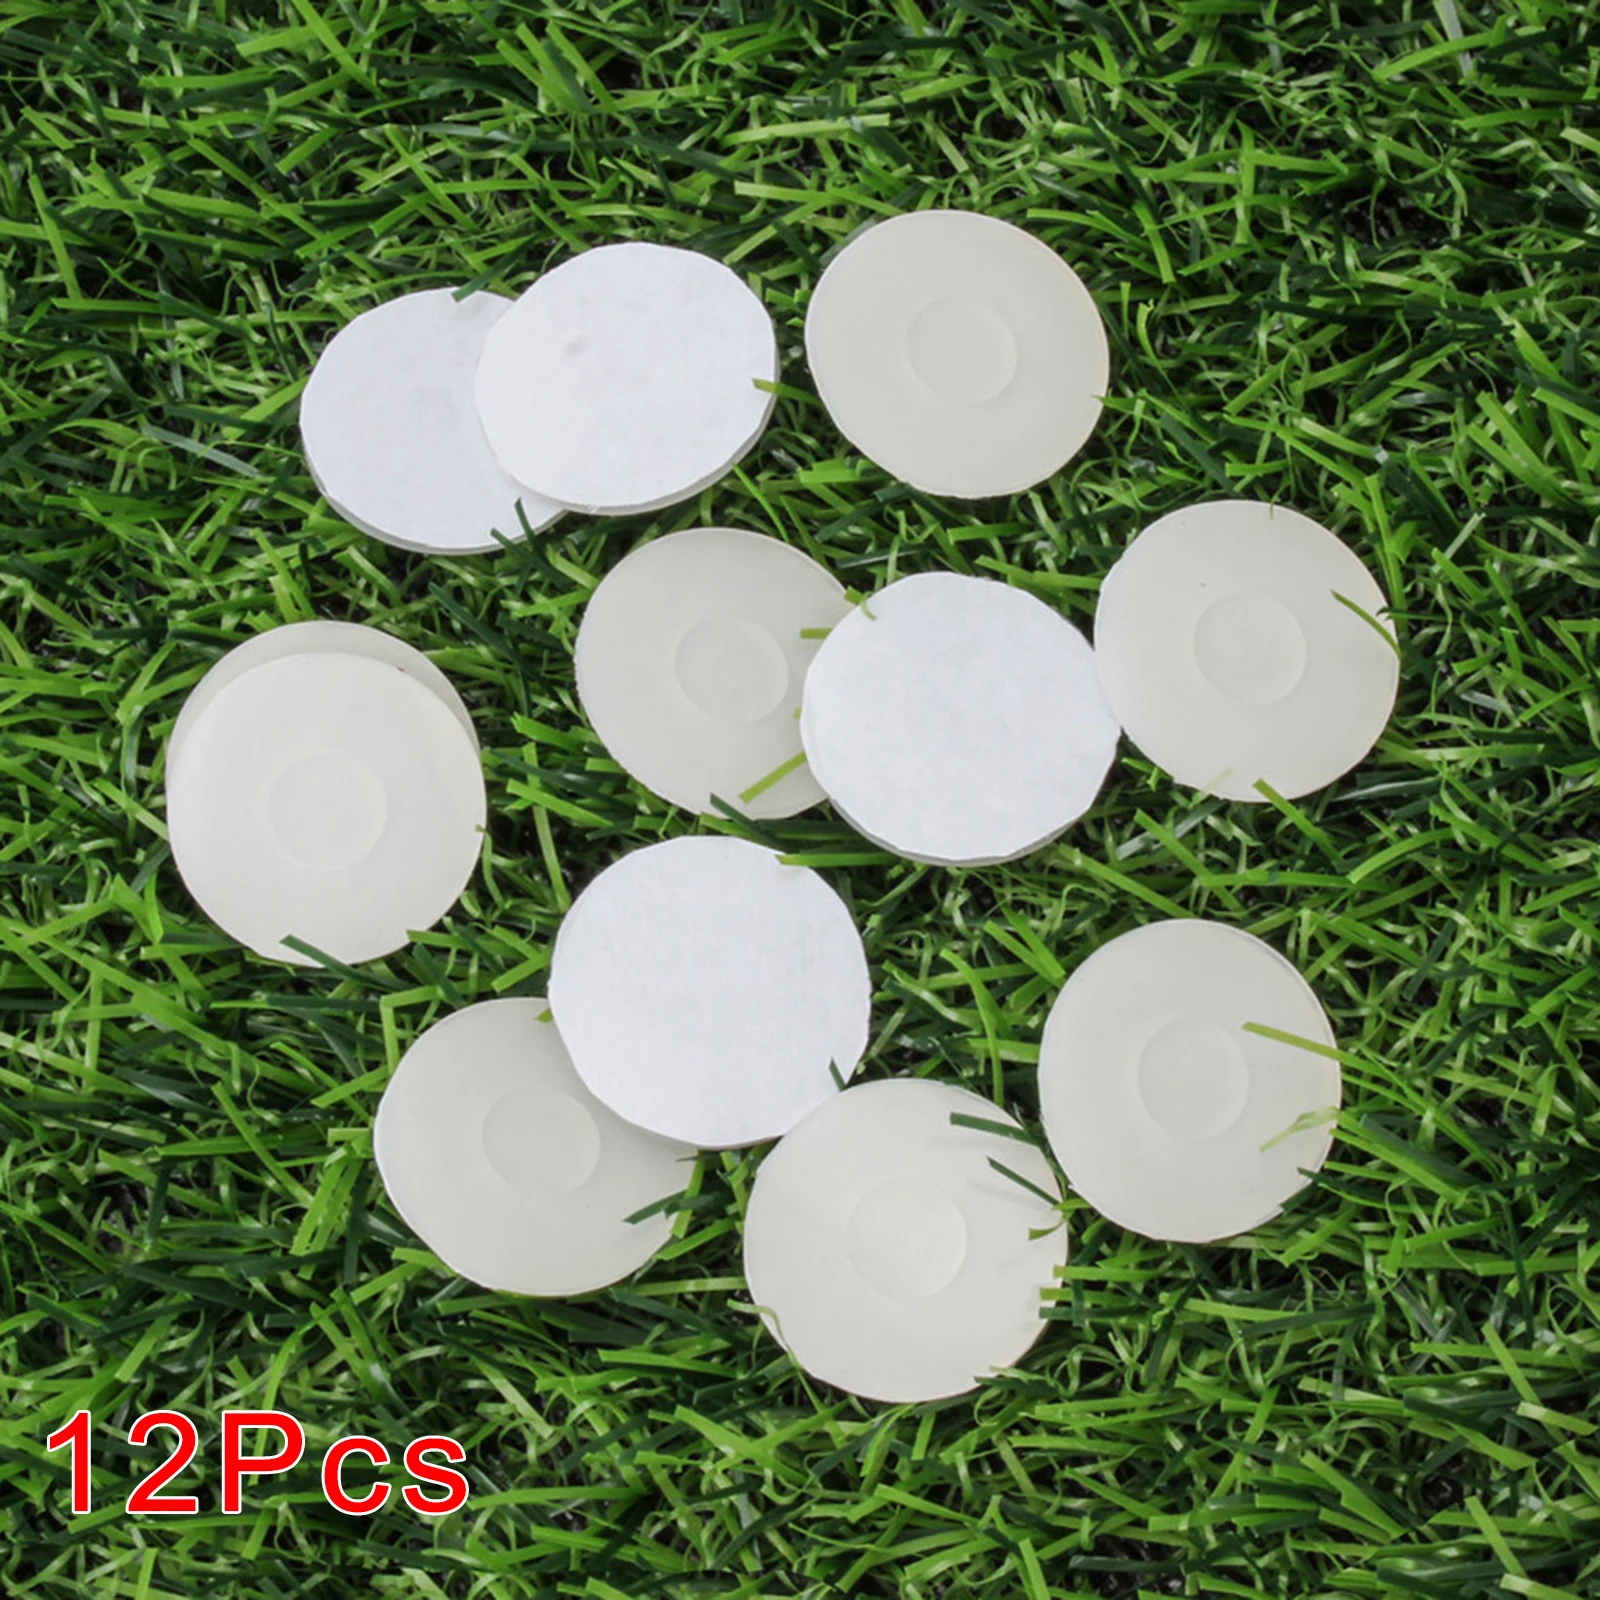 12Pcs Clear Bike French Presta Valve Sticker Rim Protection Bicycle Pad Tube Tire Gasket Repair Mountain Road Accessories